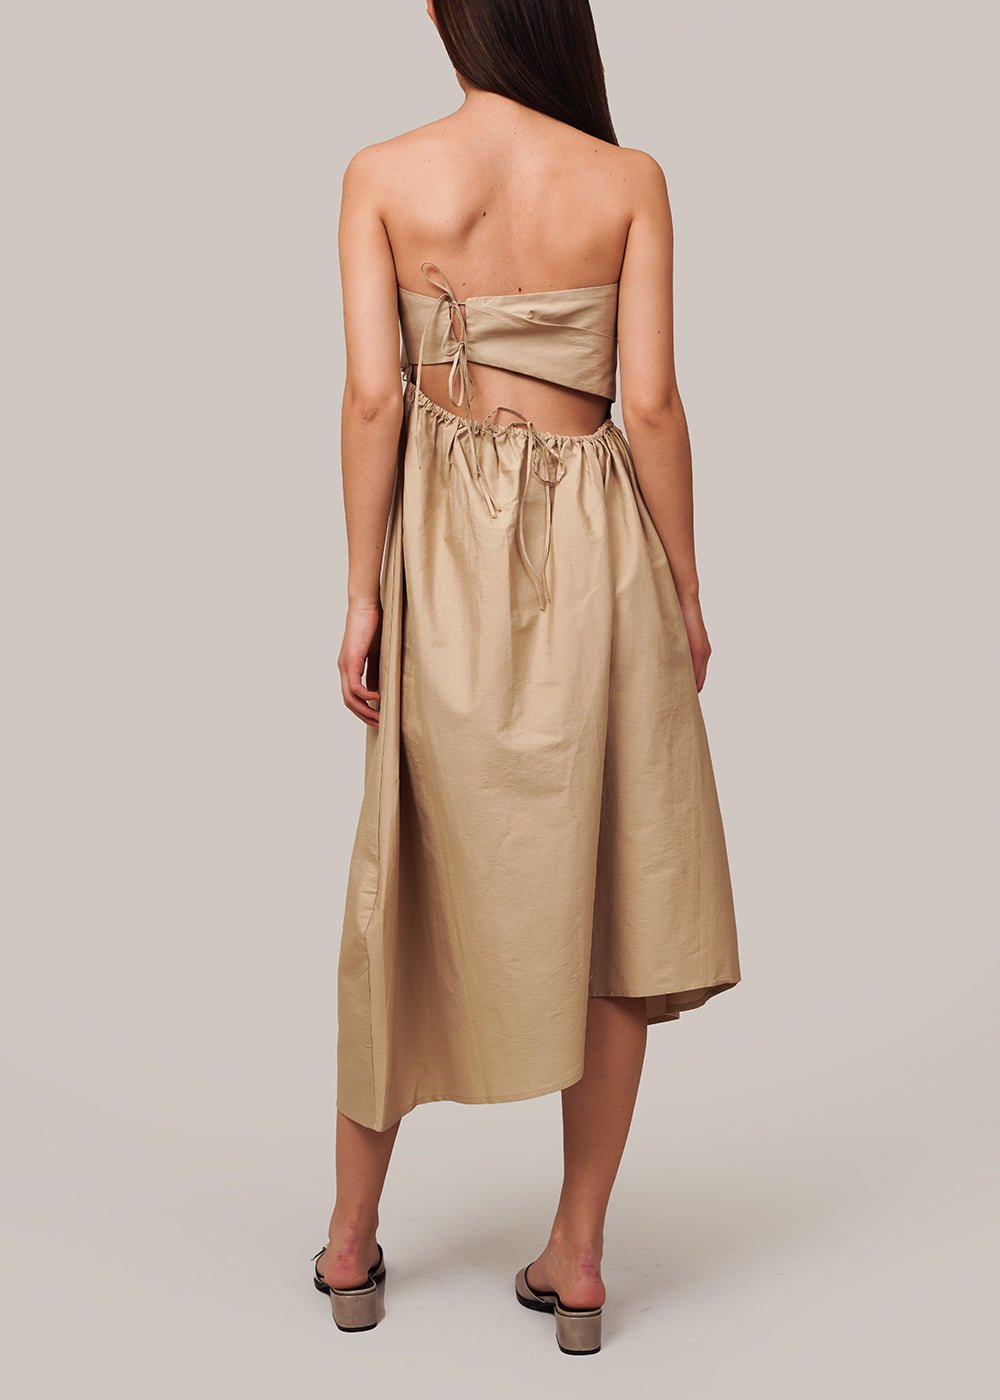 Cordera Toasted Strapless Dress - New Classics Studios Sustainable Ethical Fashion Canada